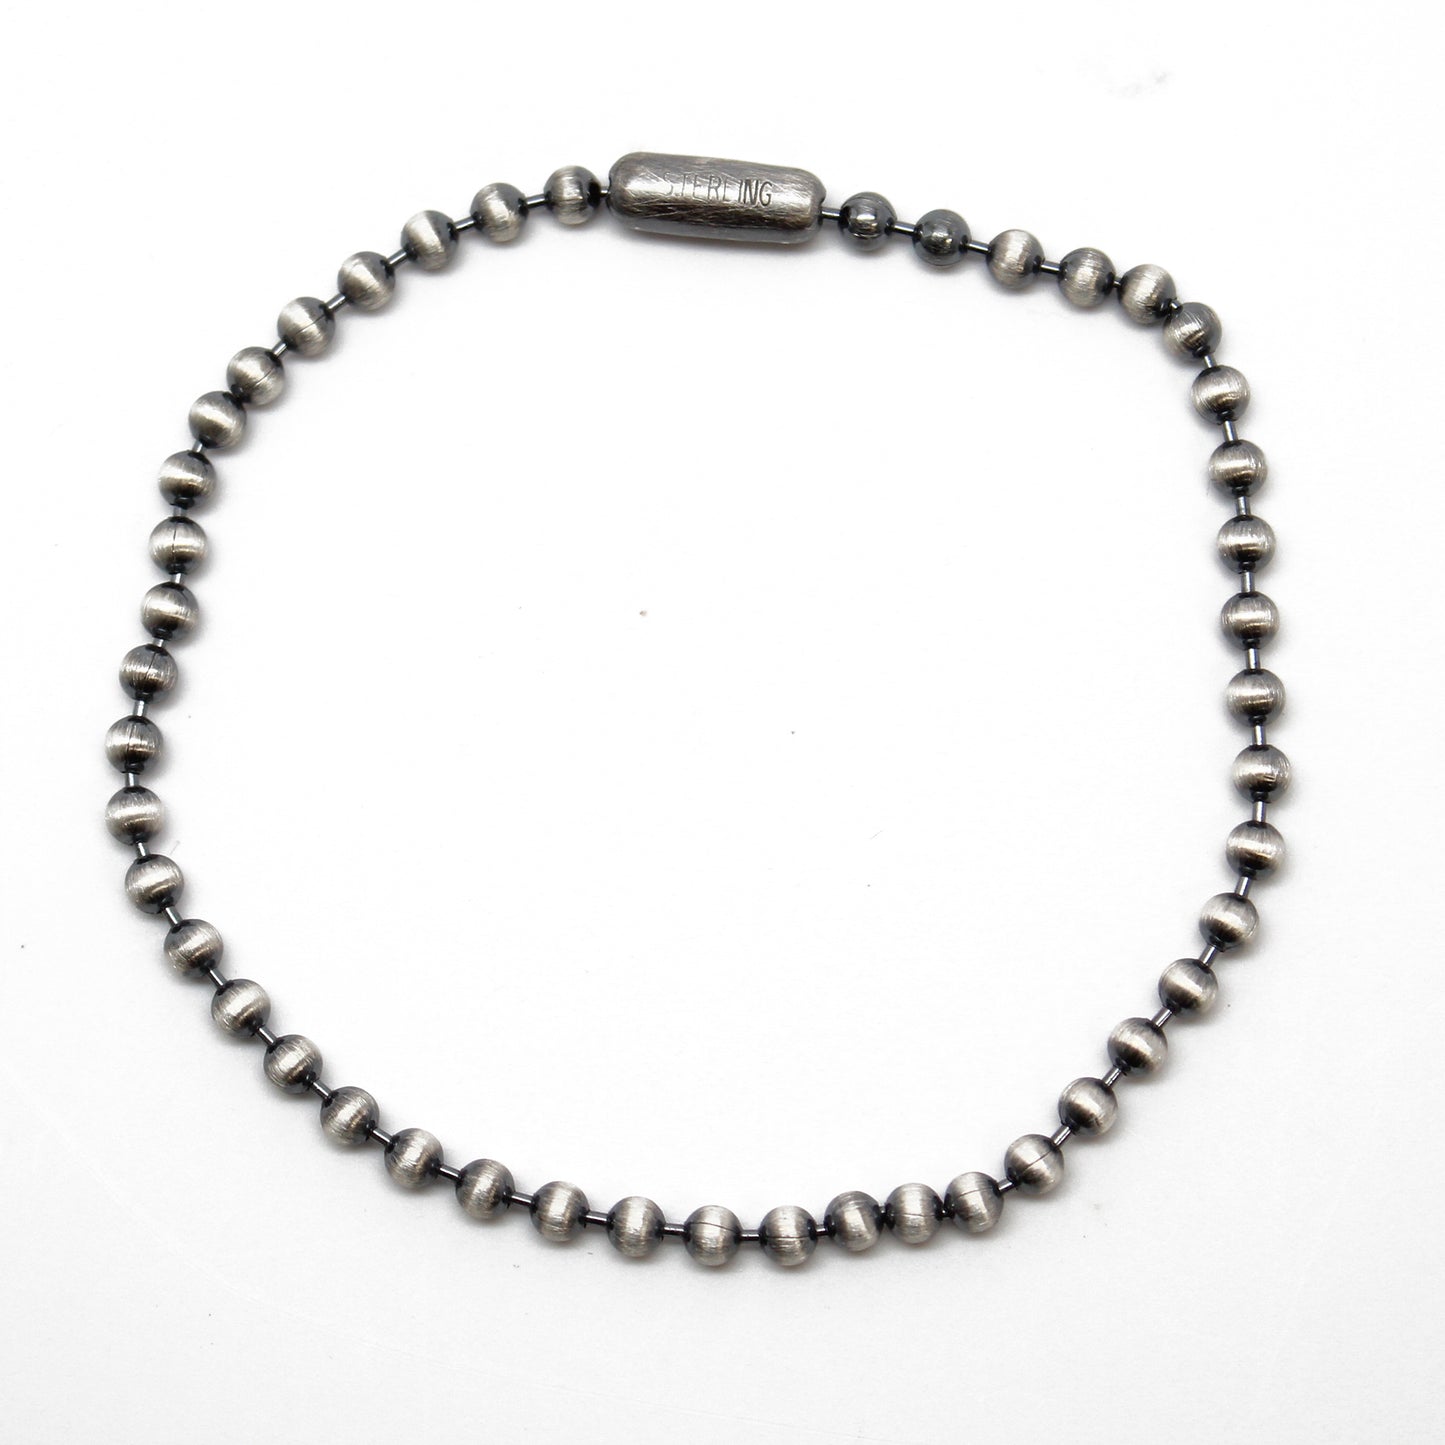 3mm Sterling Silver Bead Ball Chain Bracelet or Necklace – Kathy Bankston